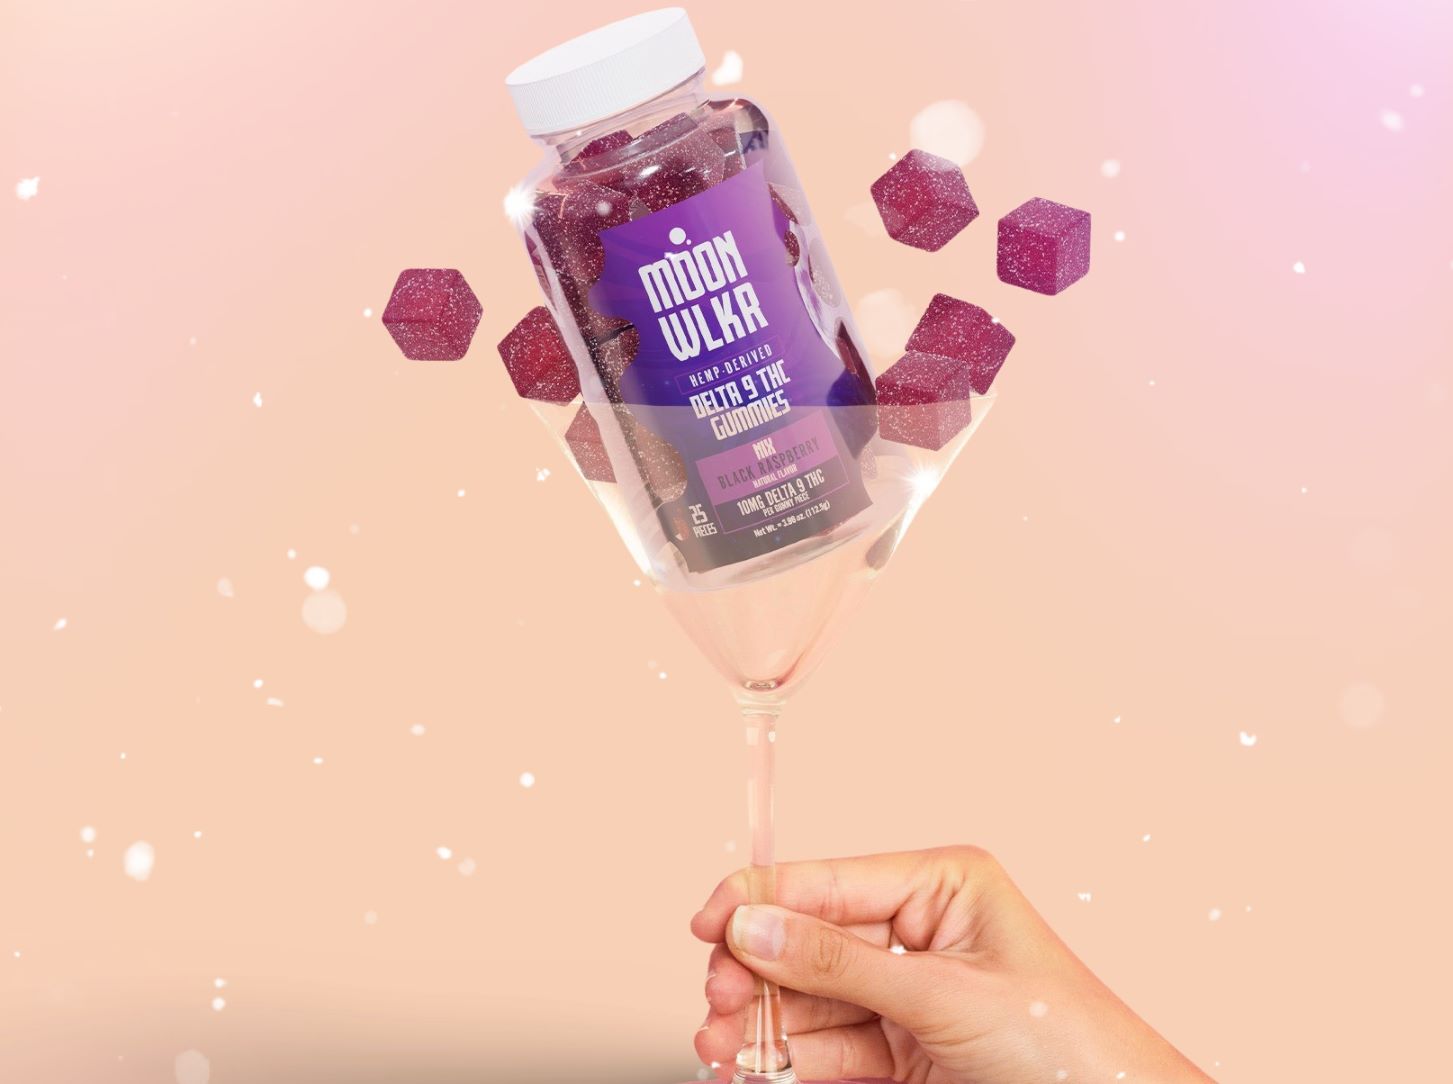 Hand holding up a Bottle of Delta-9 Gummies inside of a martini glass